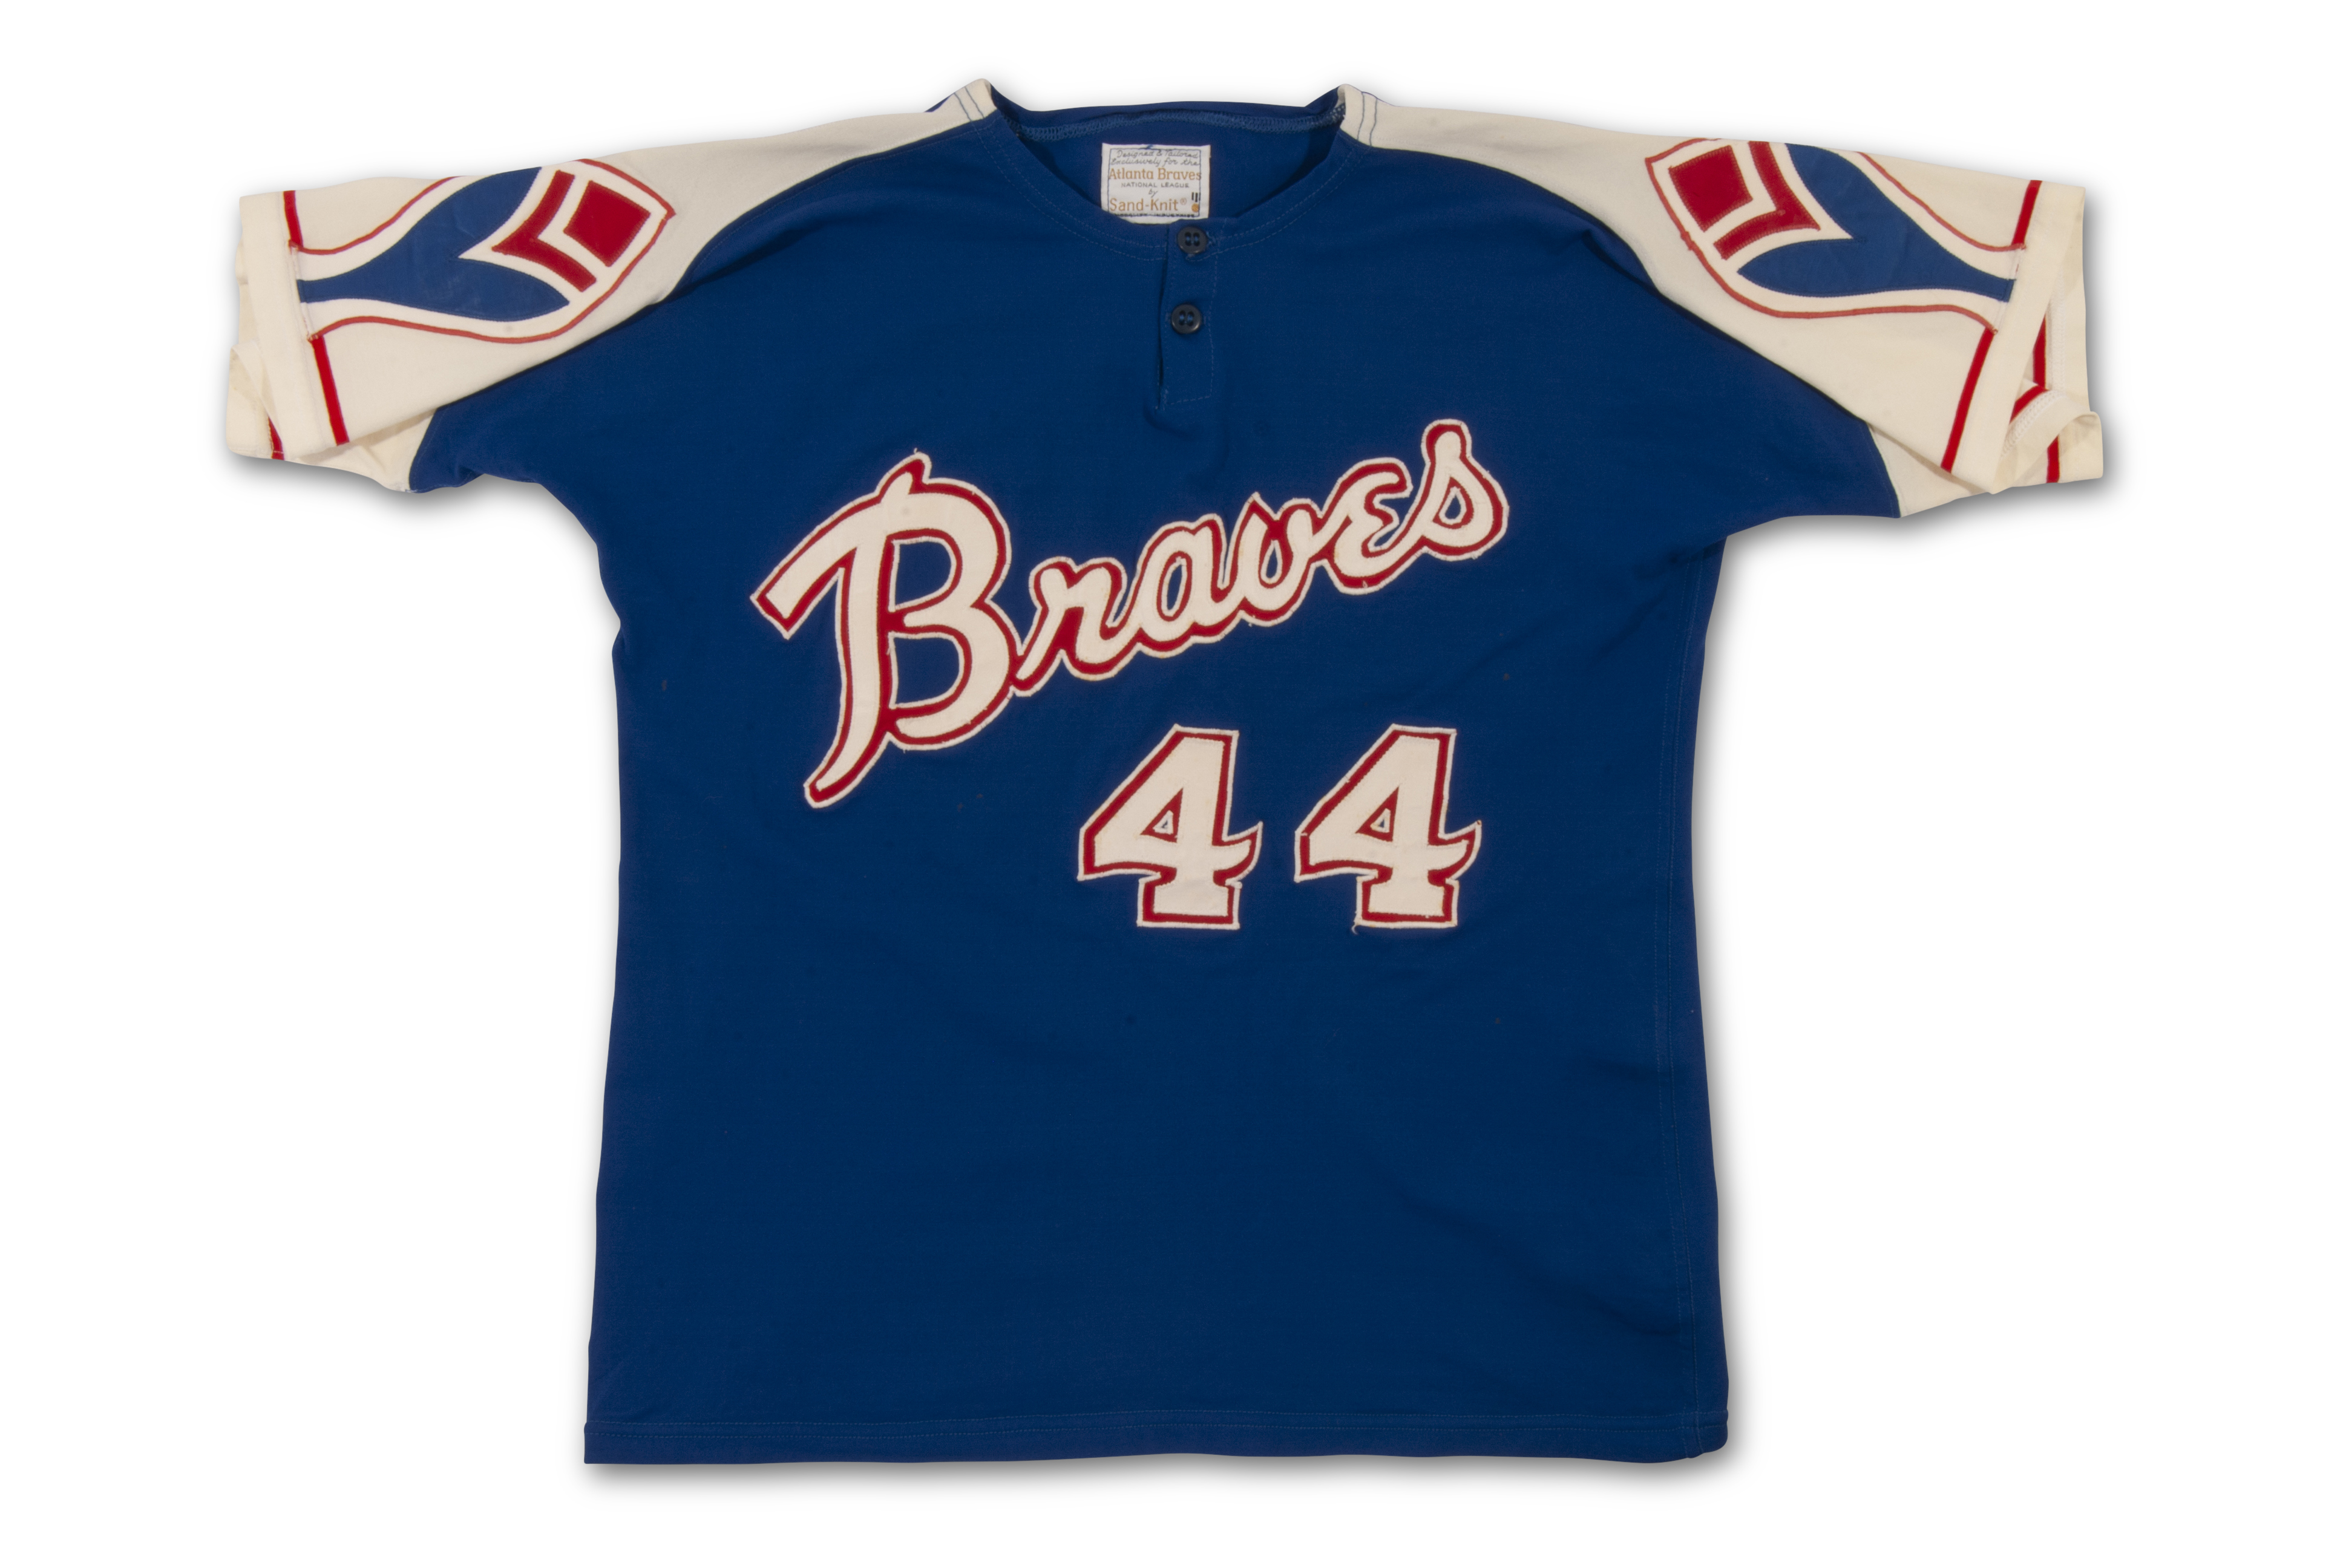 Lot Detail - 1972 Hank Aaron Atlanta Braves Game Worn Road Jersey with  Outstanding Provenance - SGC Superior (Highest Possible Grade)